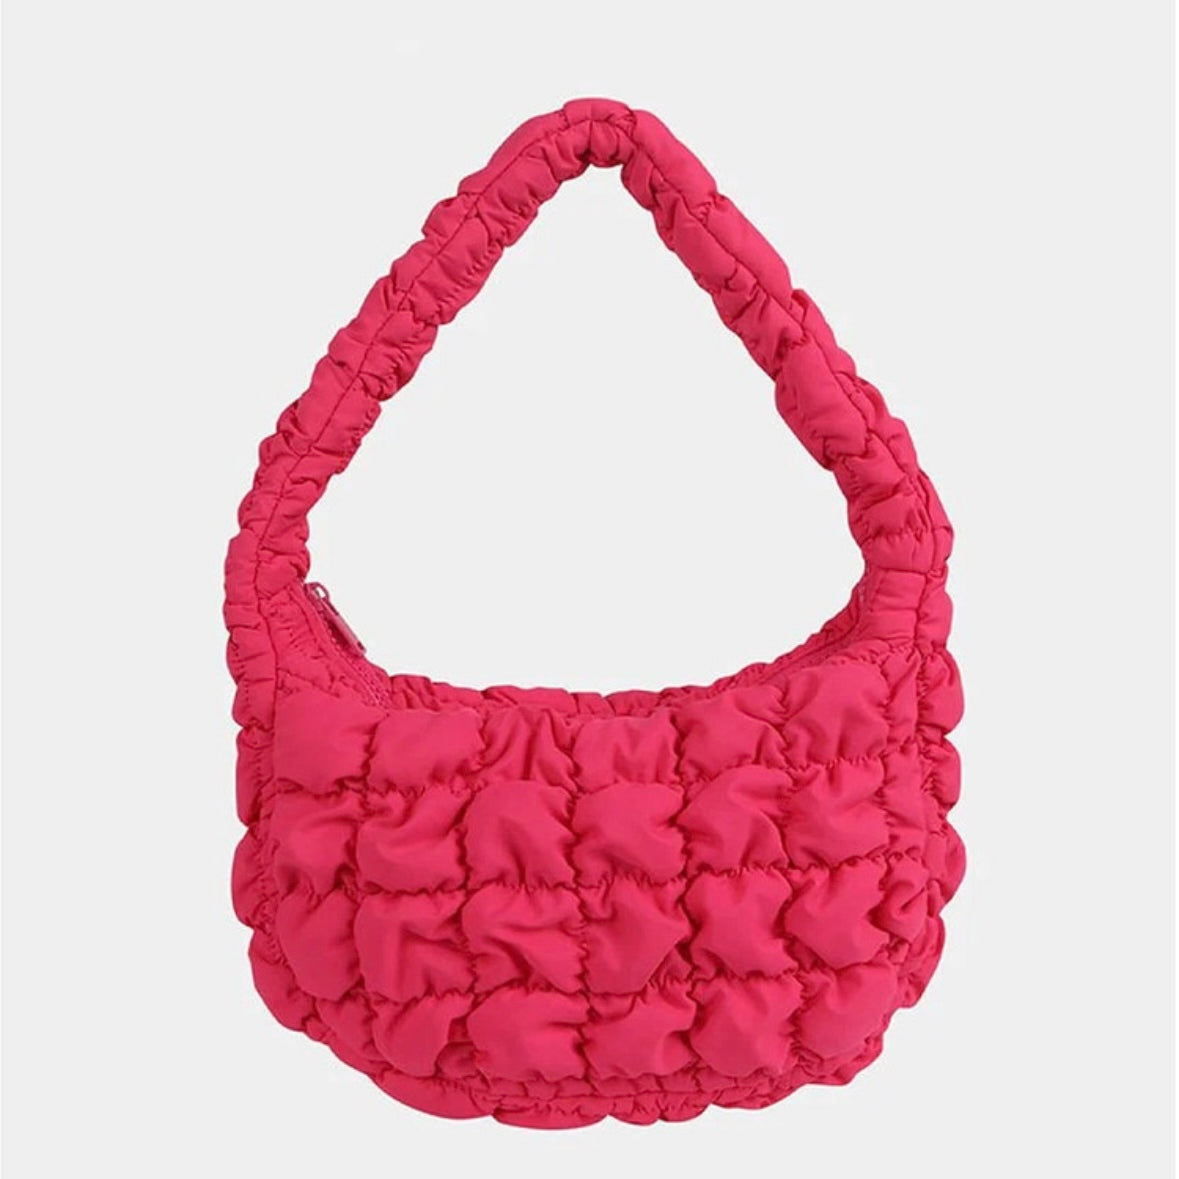 Soft Mini Quilted Bag